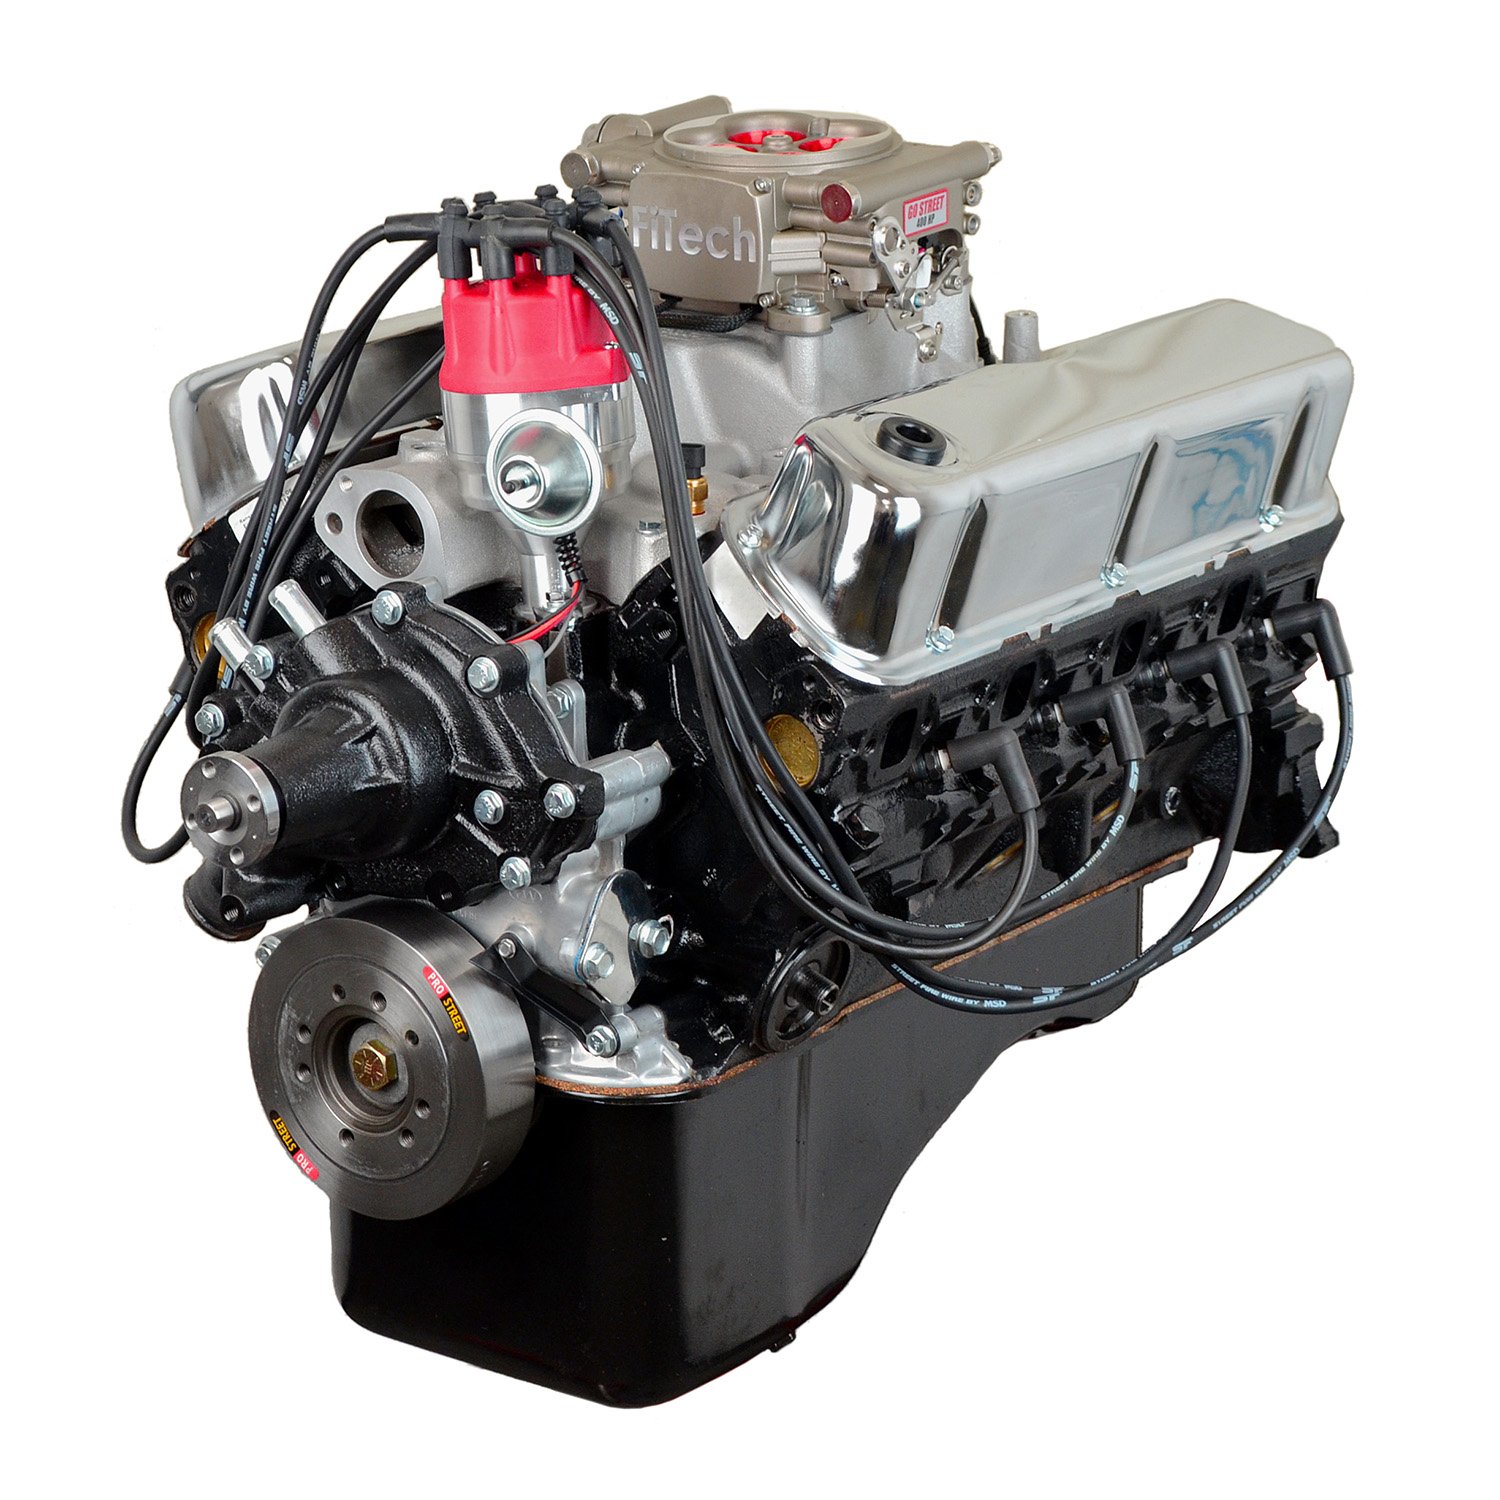 Atk Engines High Performance Crate Engine Small Block Ford 302ci 300hp 336tq